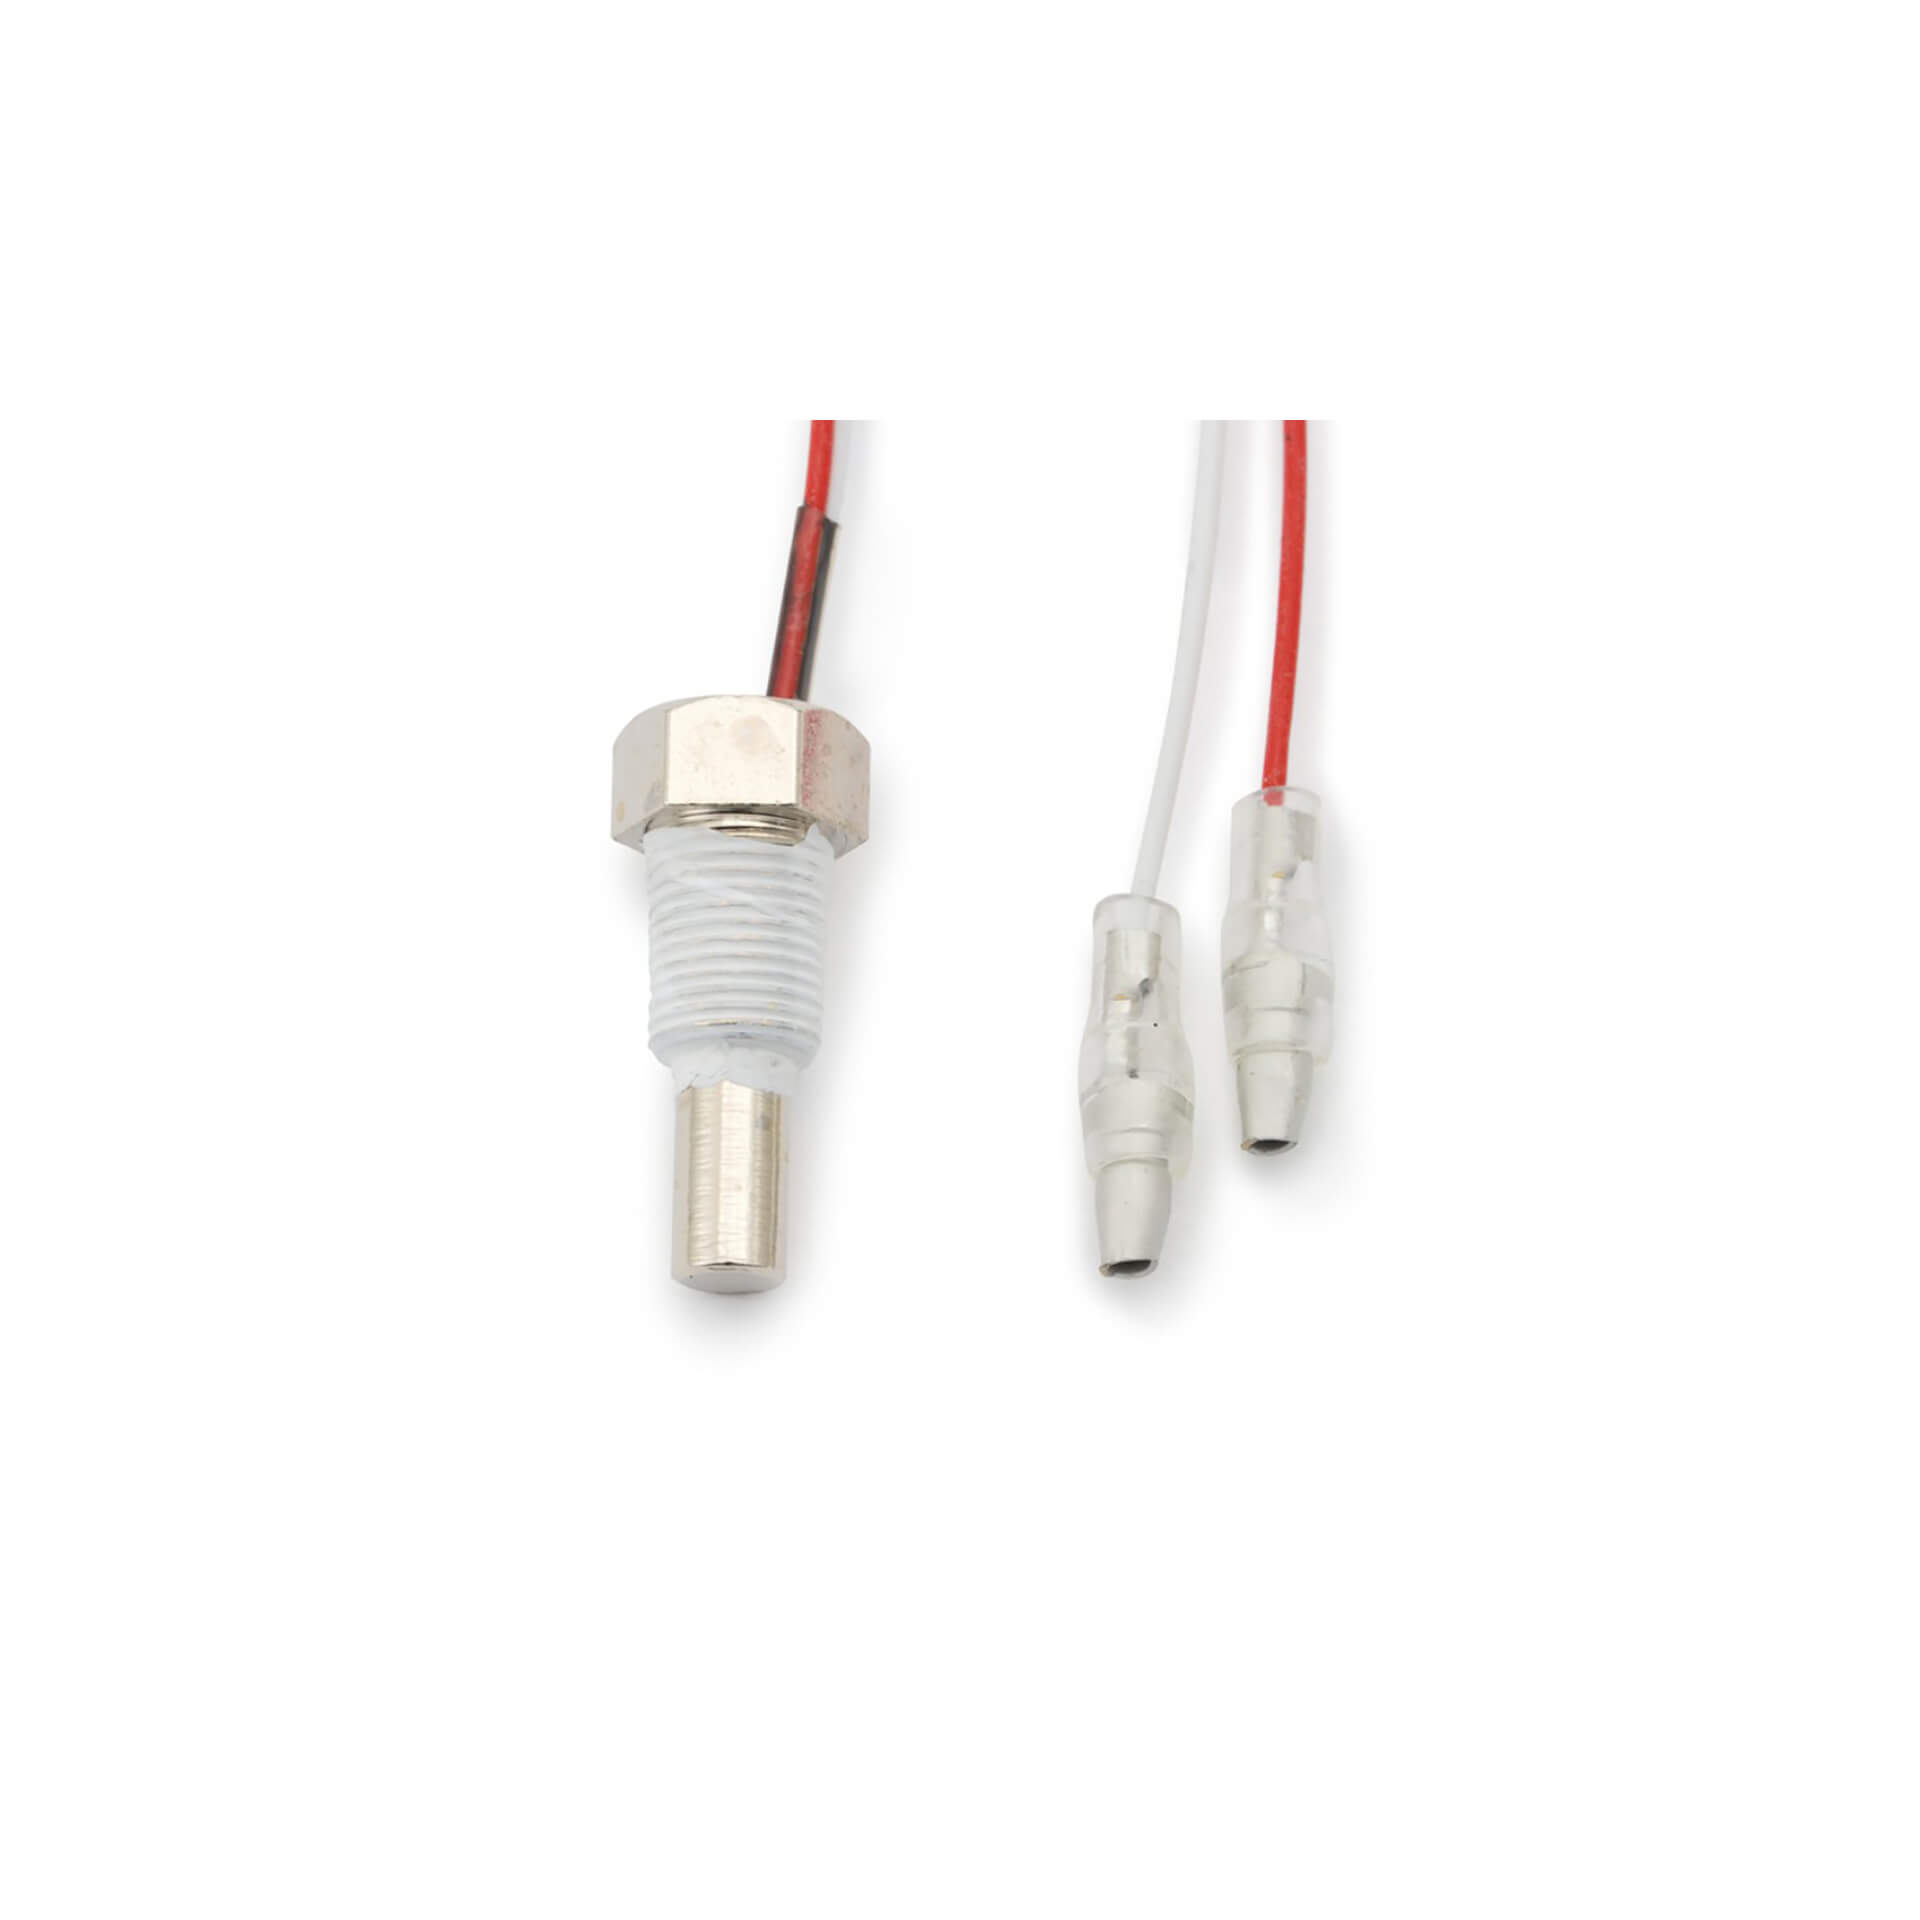 daytona Temperature sensor with 1/8 inch thread and external cable for VELONA instruments